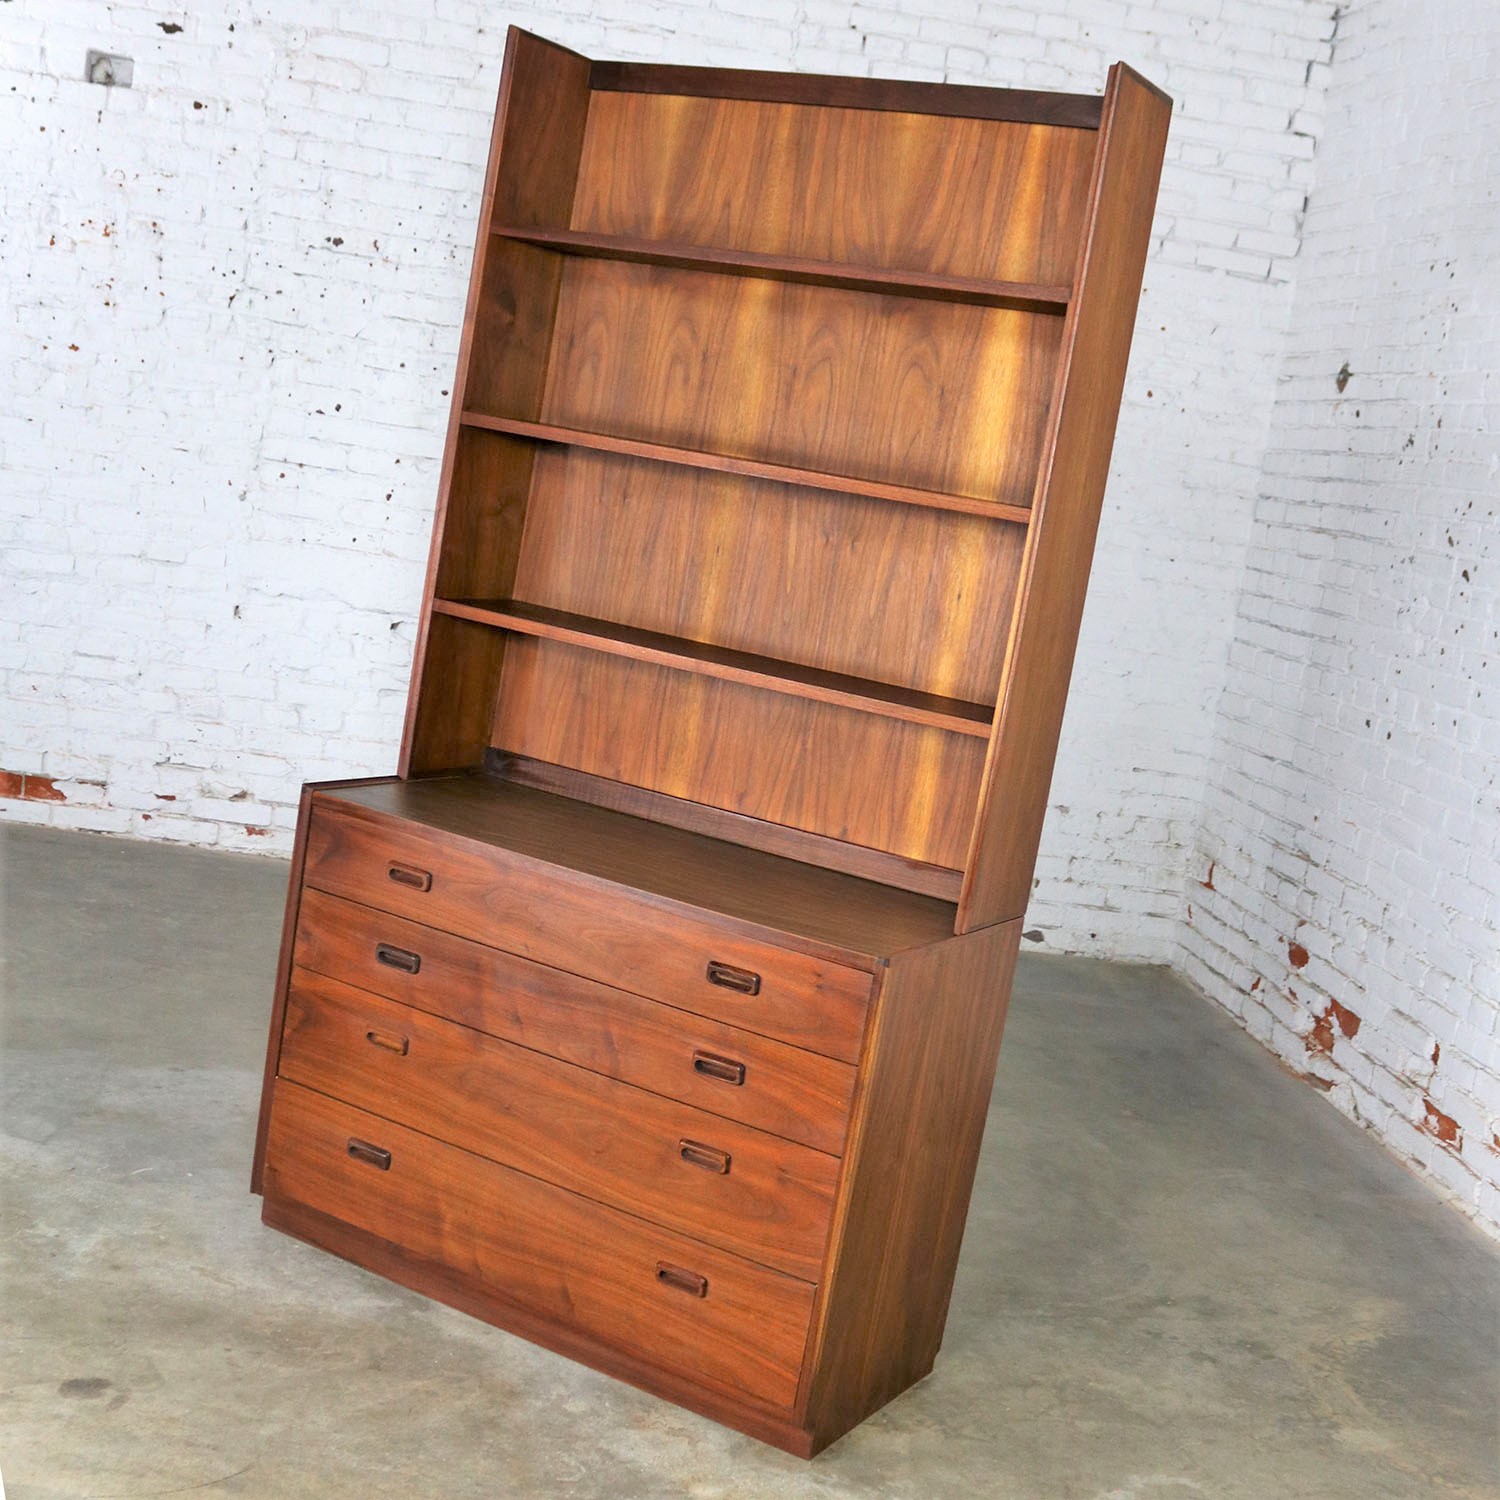 Two Piece Bookcase Display Cabinet Attributed to Founders Furniture Mid Century Modern